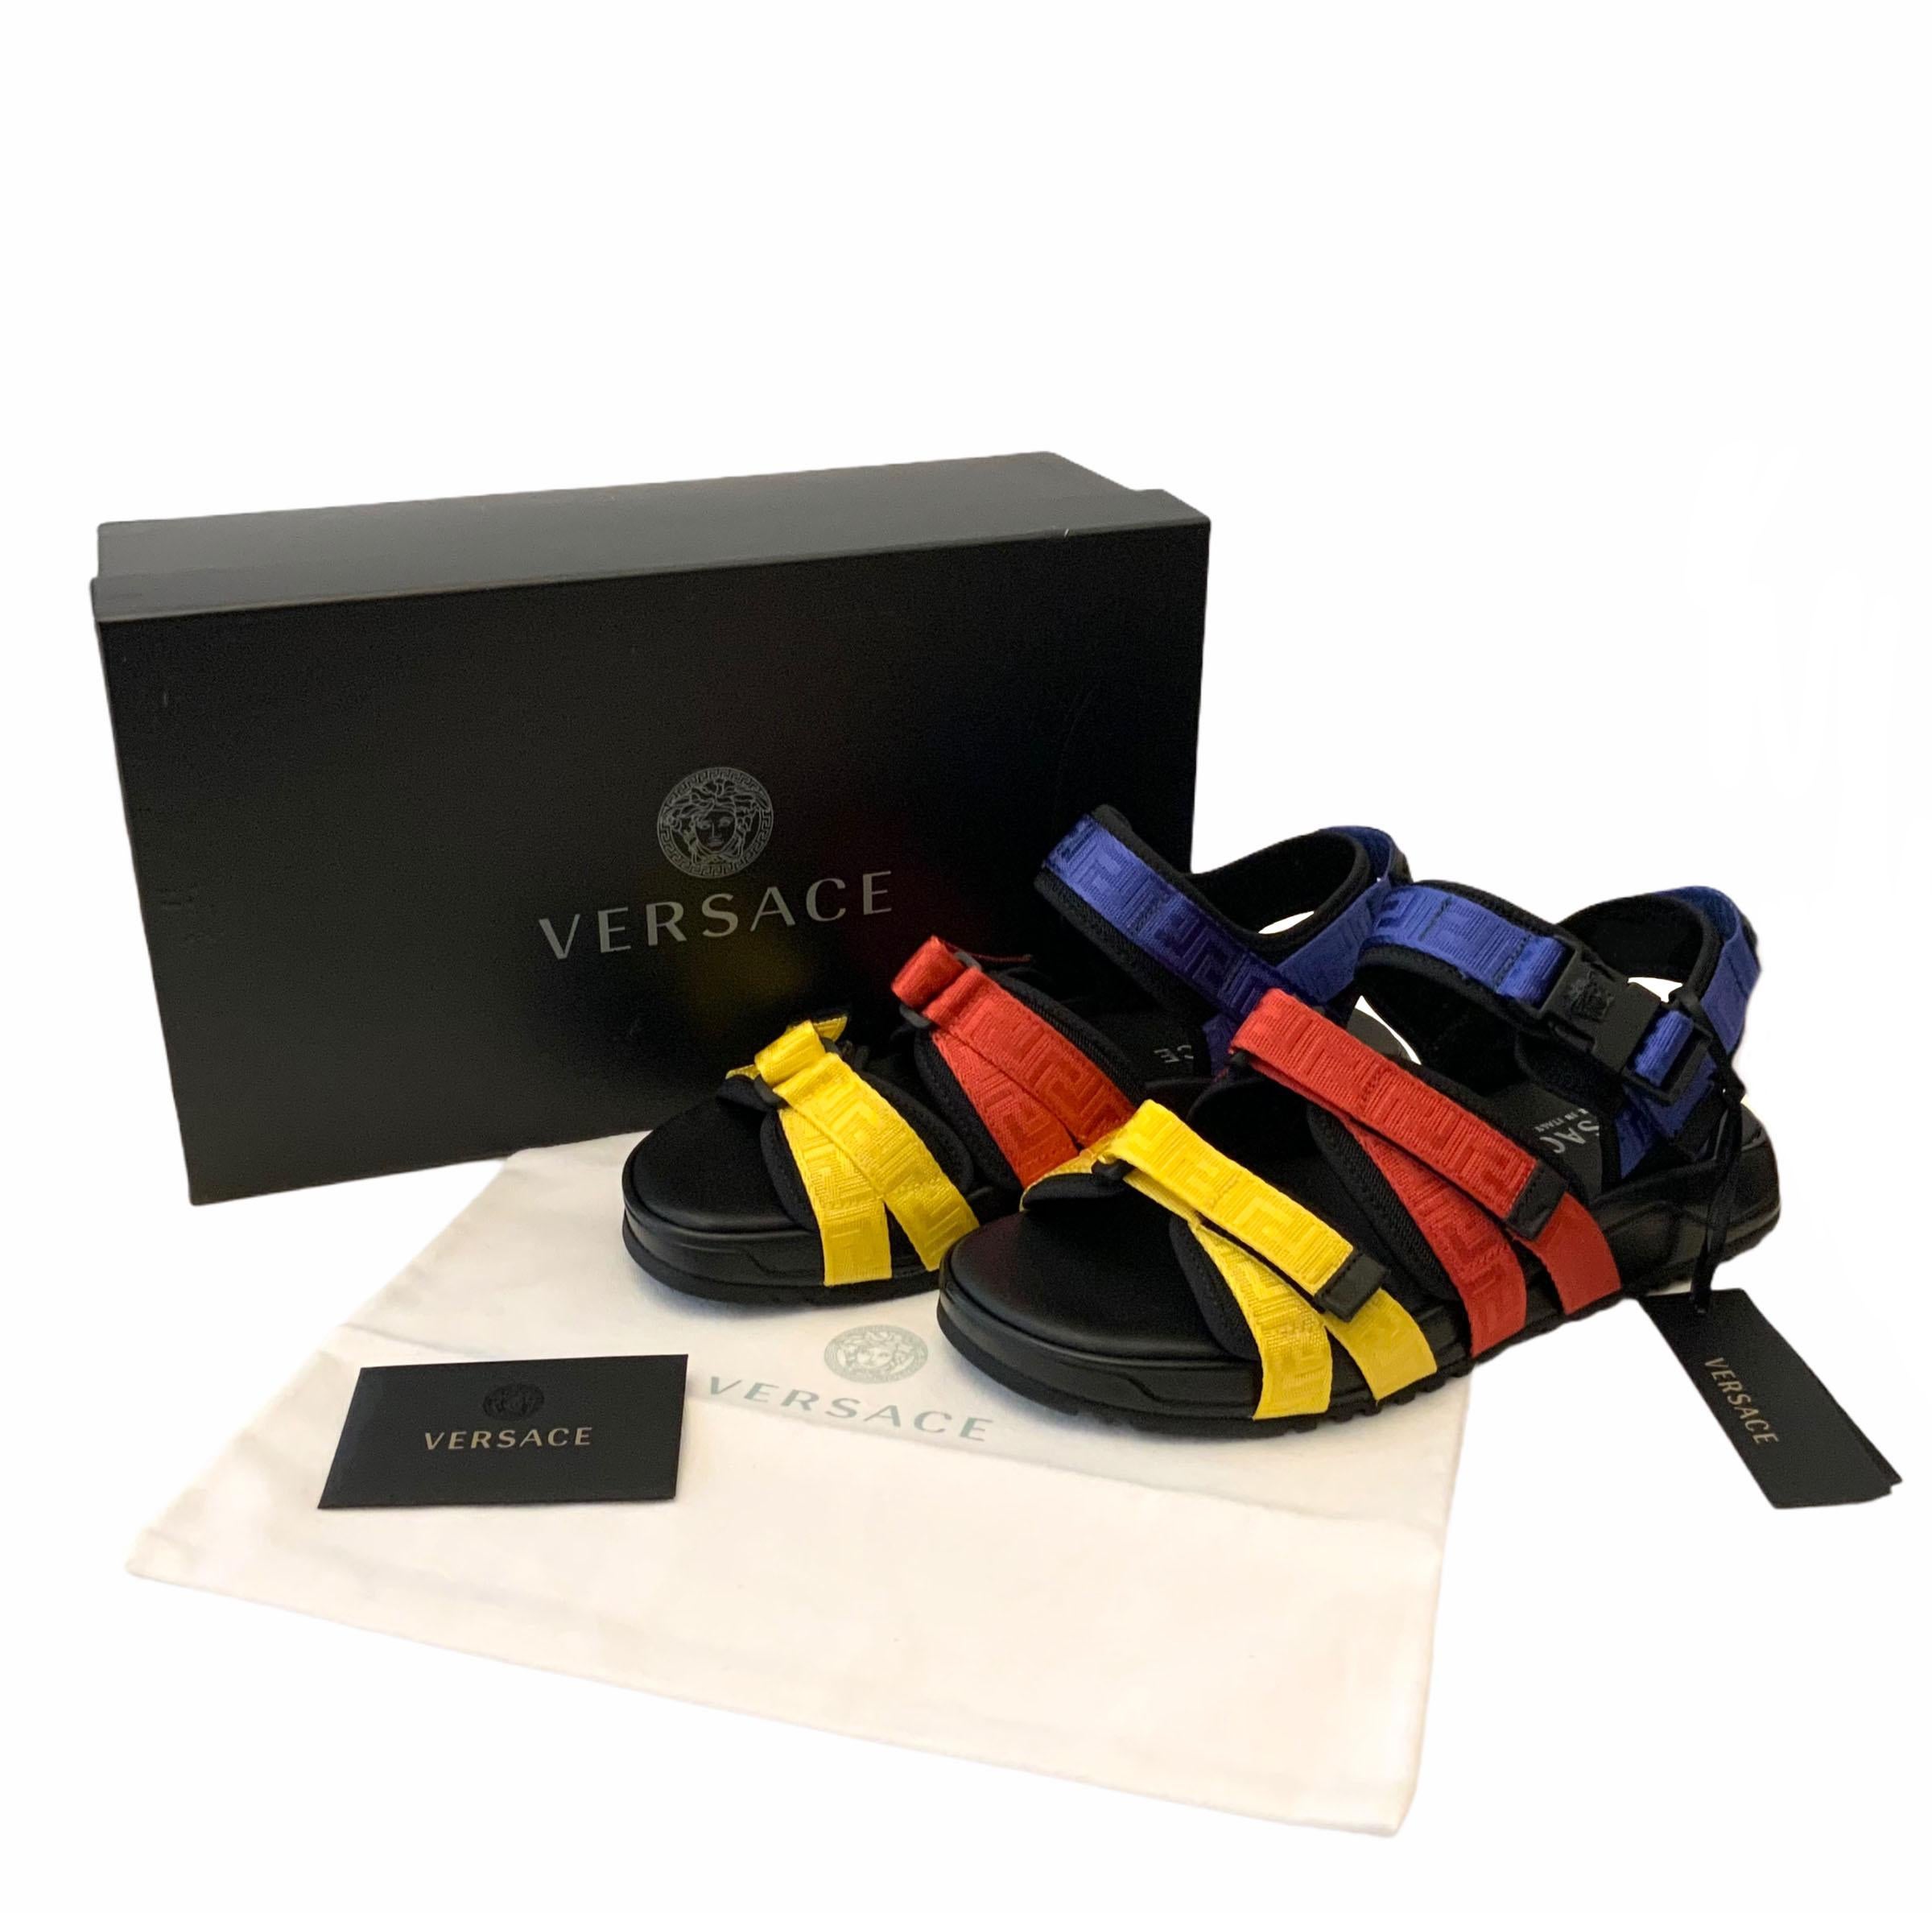 These pre-owned but new sandals from Versace are of a greek inspiration.
Each velcro strap is a colorblock in yellow, red and blue while the insole is crafted in black leather as a contrast.
They feature a black leather logo patch at the heel and a